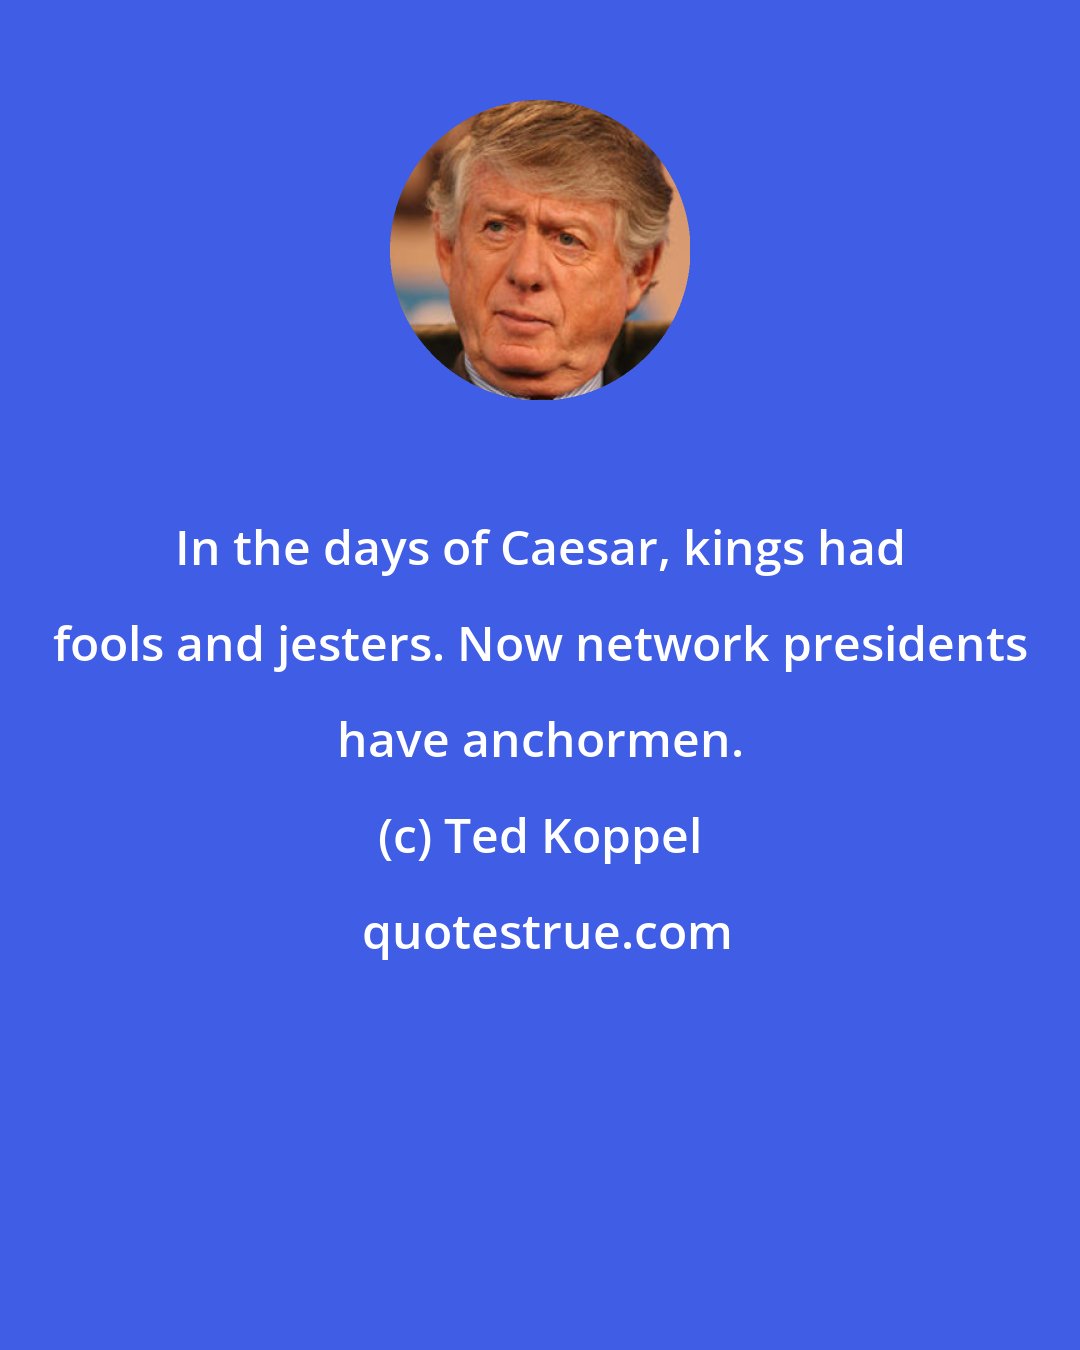 Ted Koppel: In the days of Caesar, kings had fools and jesters. Now network presidents have anchormen.